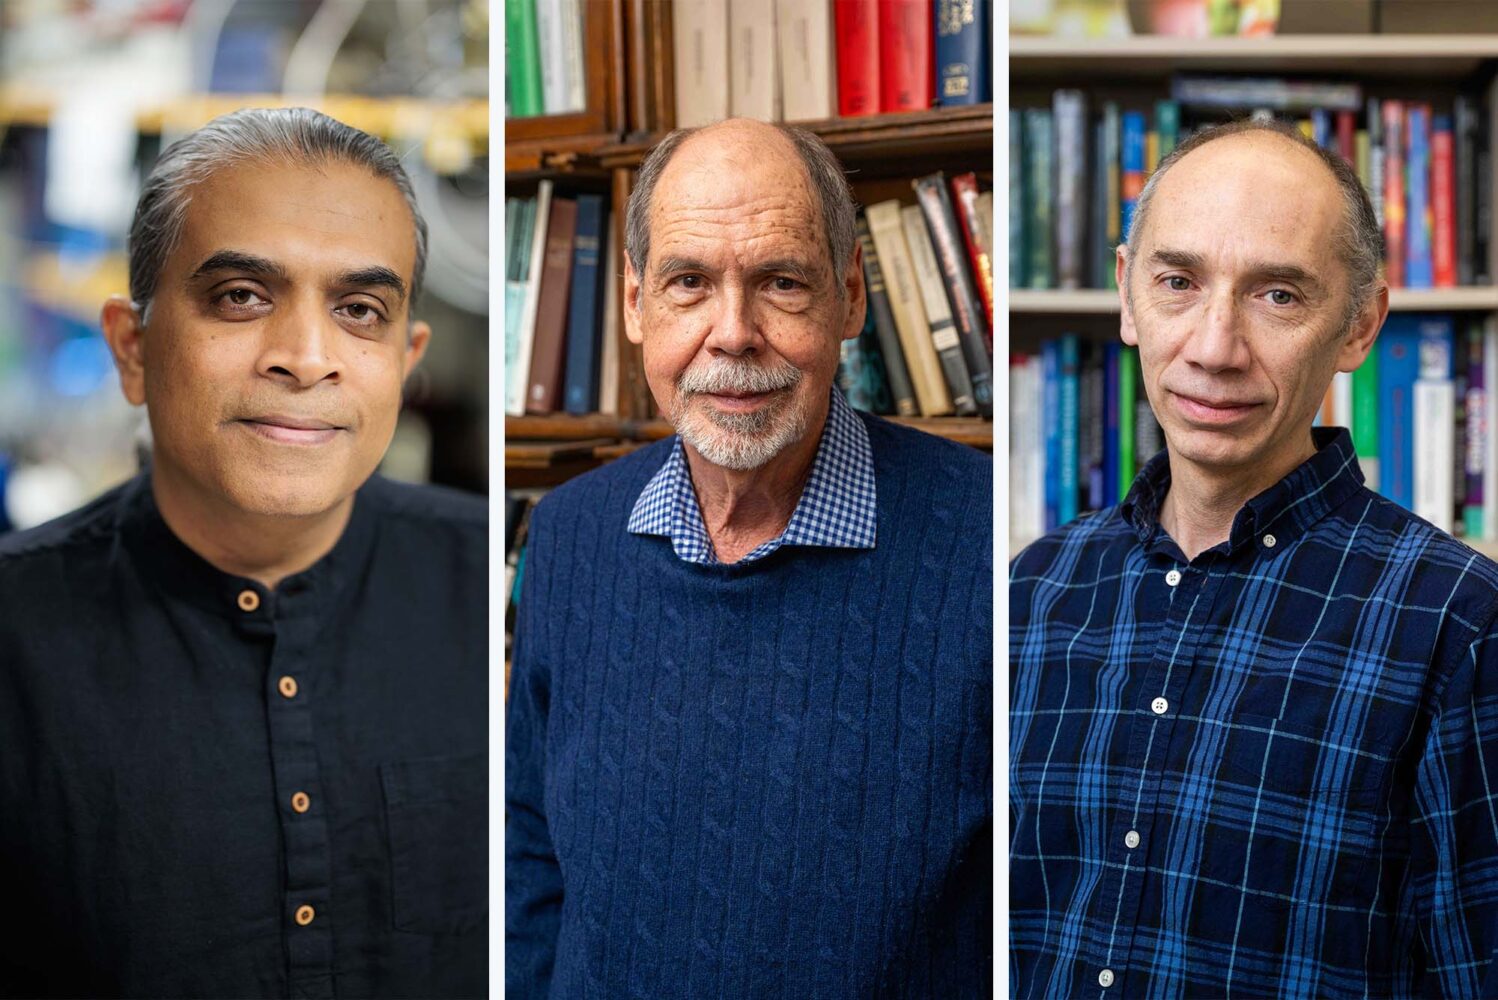 Photo: A collage image with three different men on the front. From left, electrical and computer engineer Siddharth Ramachandran, physicist Bradley Lee Roberts, and biologist Daniel Segrè